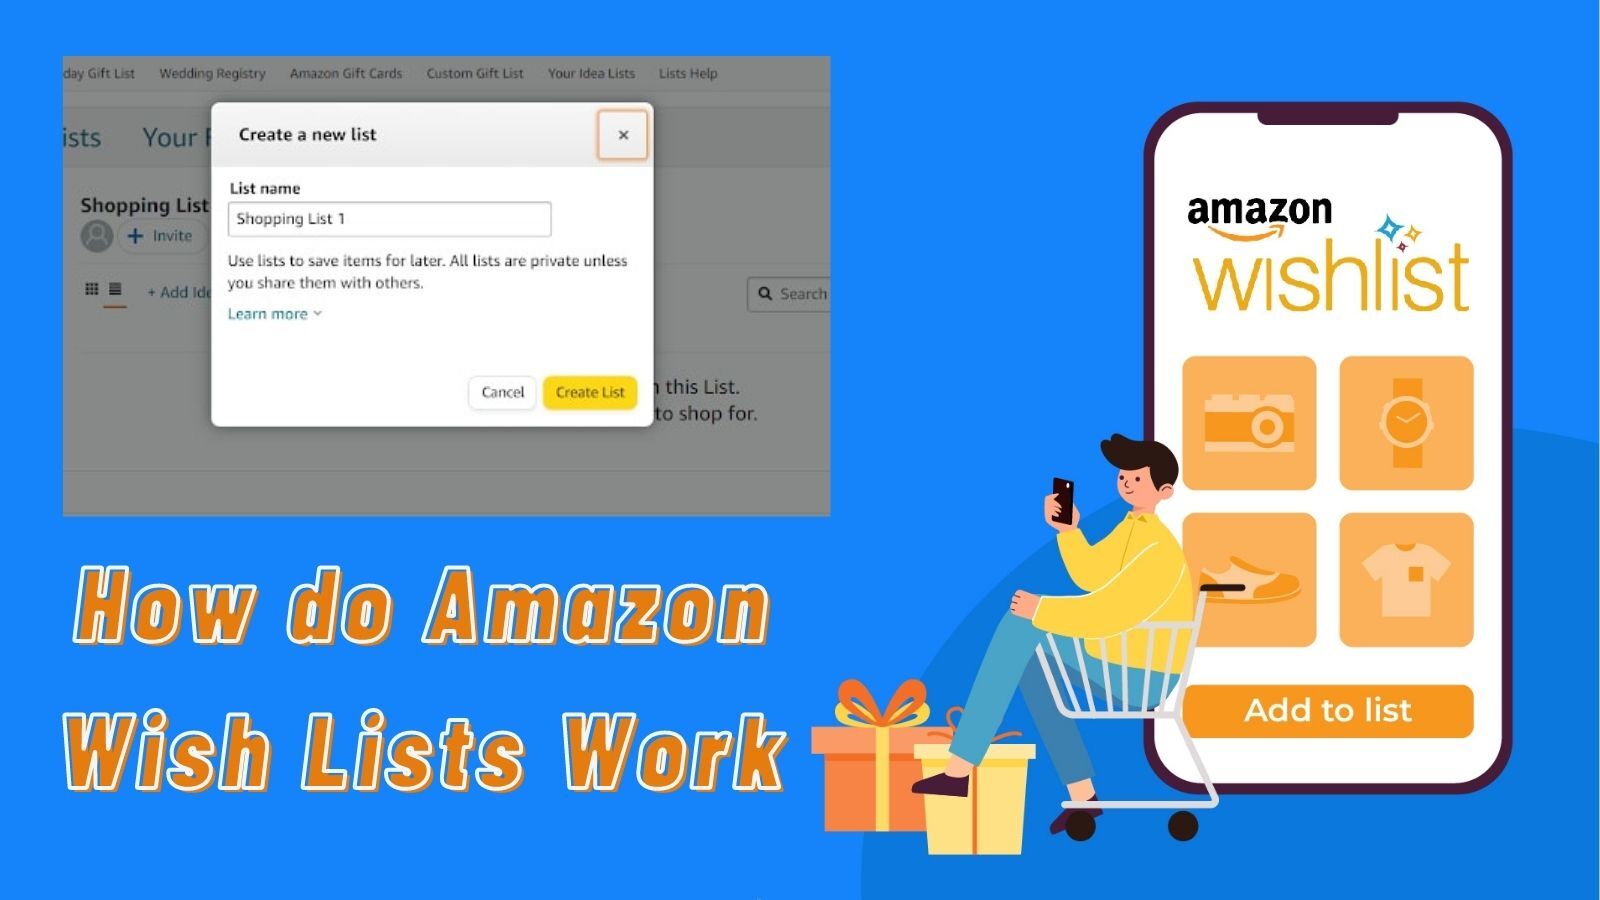 How Do Amazon Wish Lists Work? (A Step-by-Step Guide)